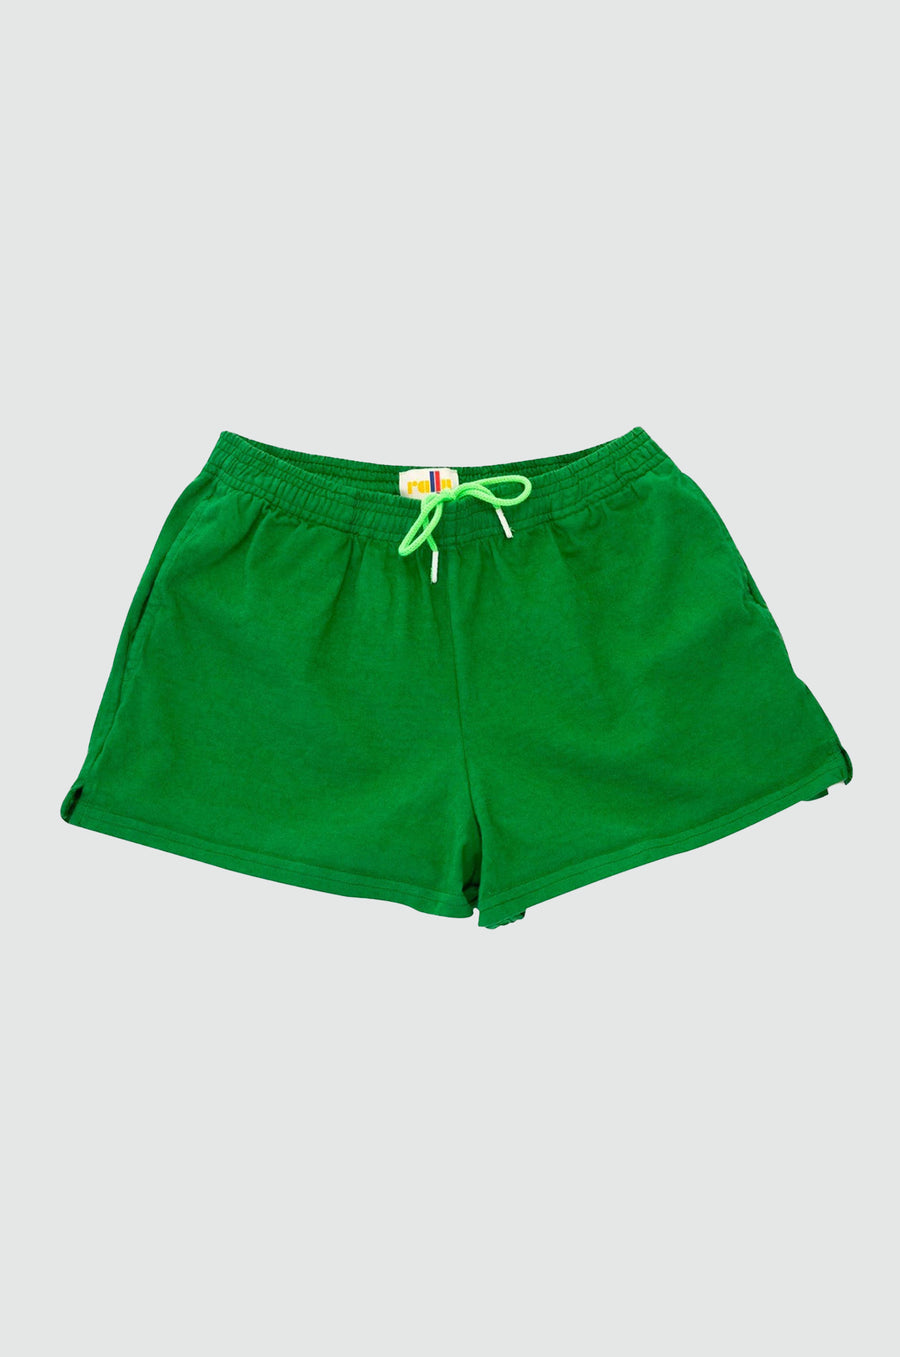 Chas Short in Green Front Flat 